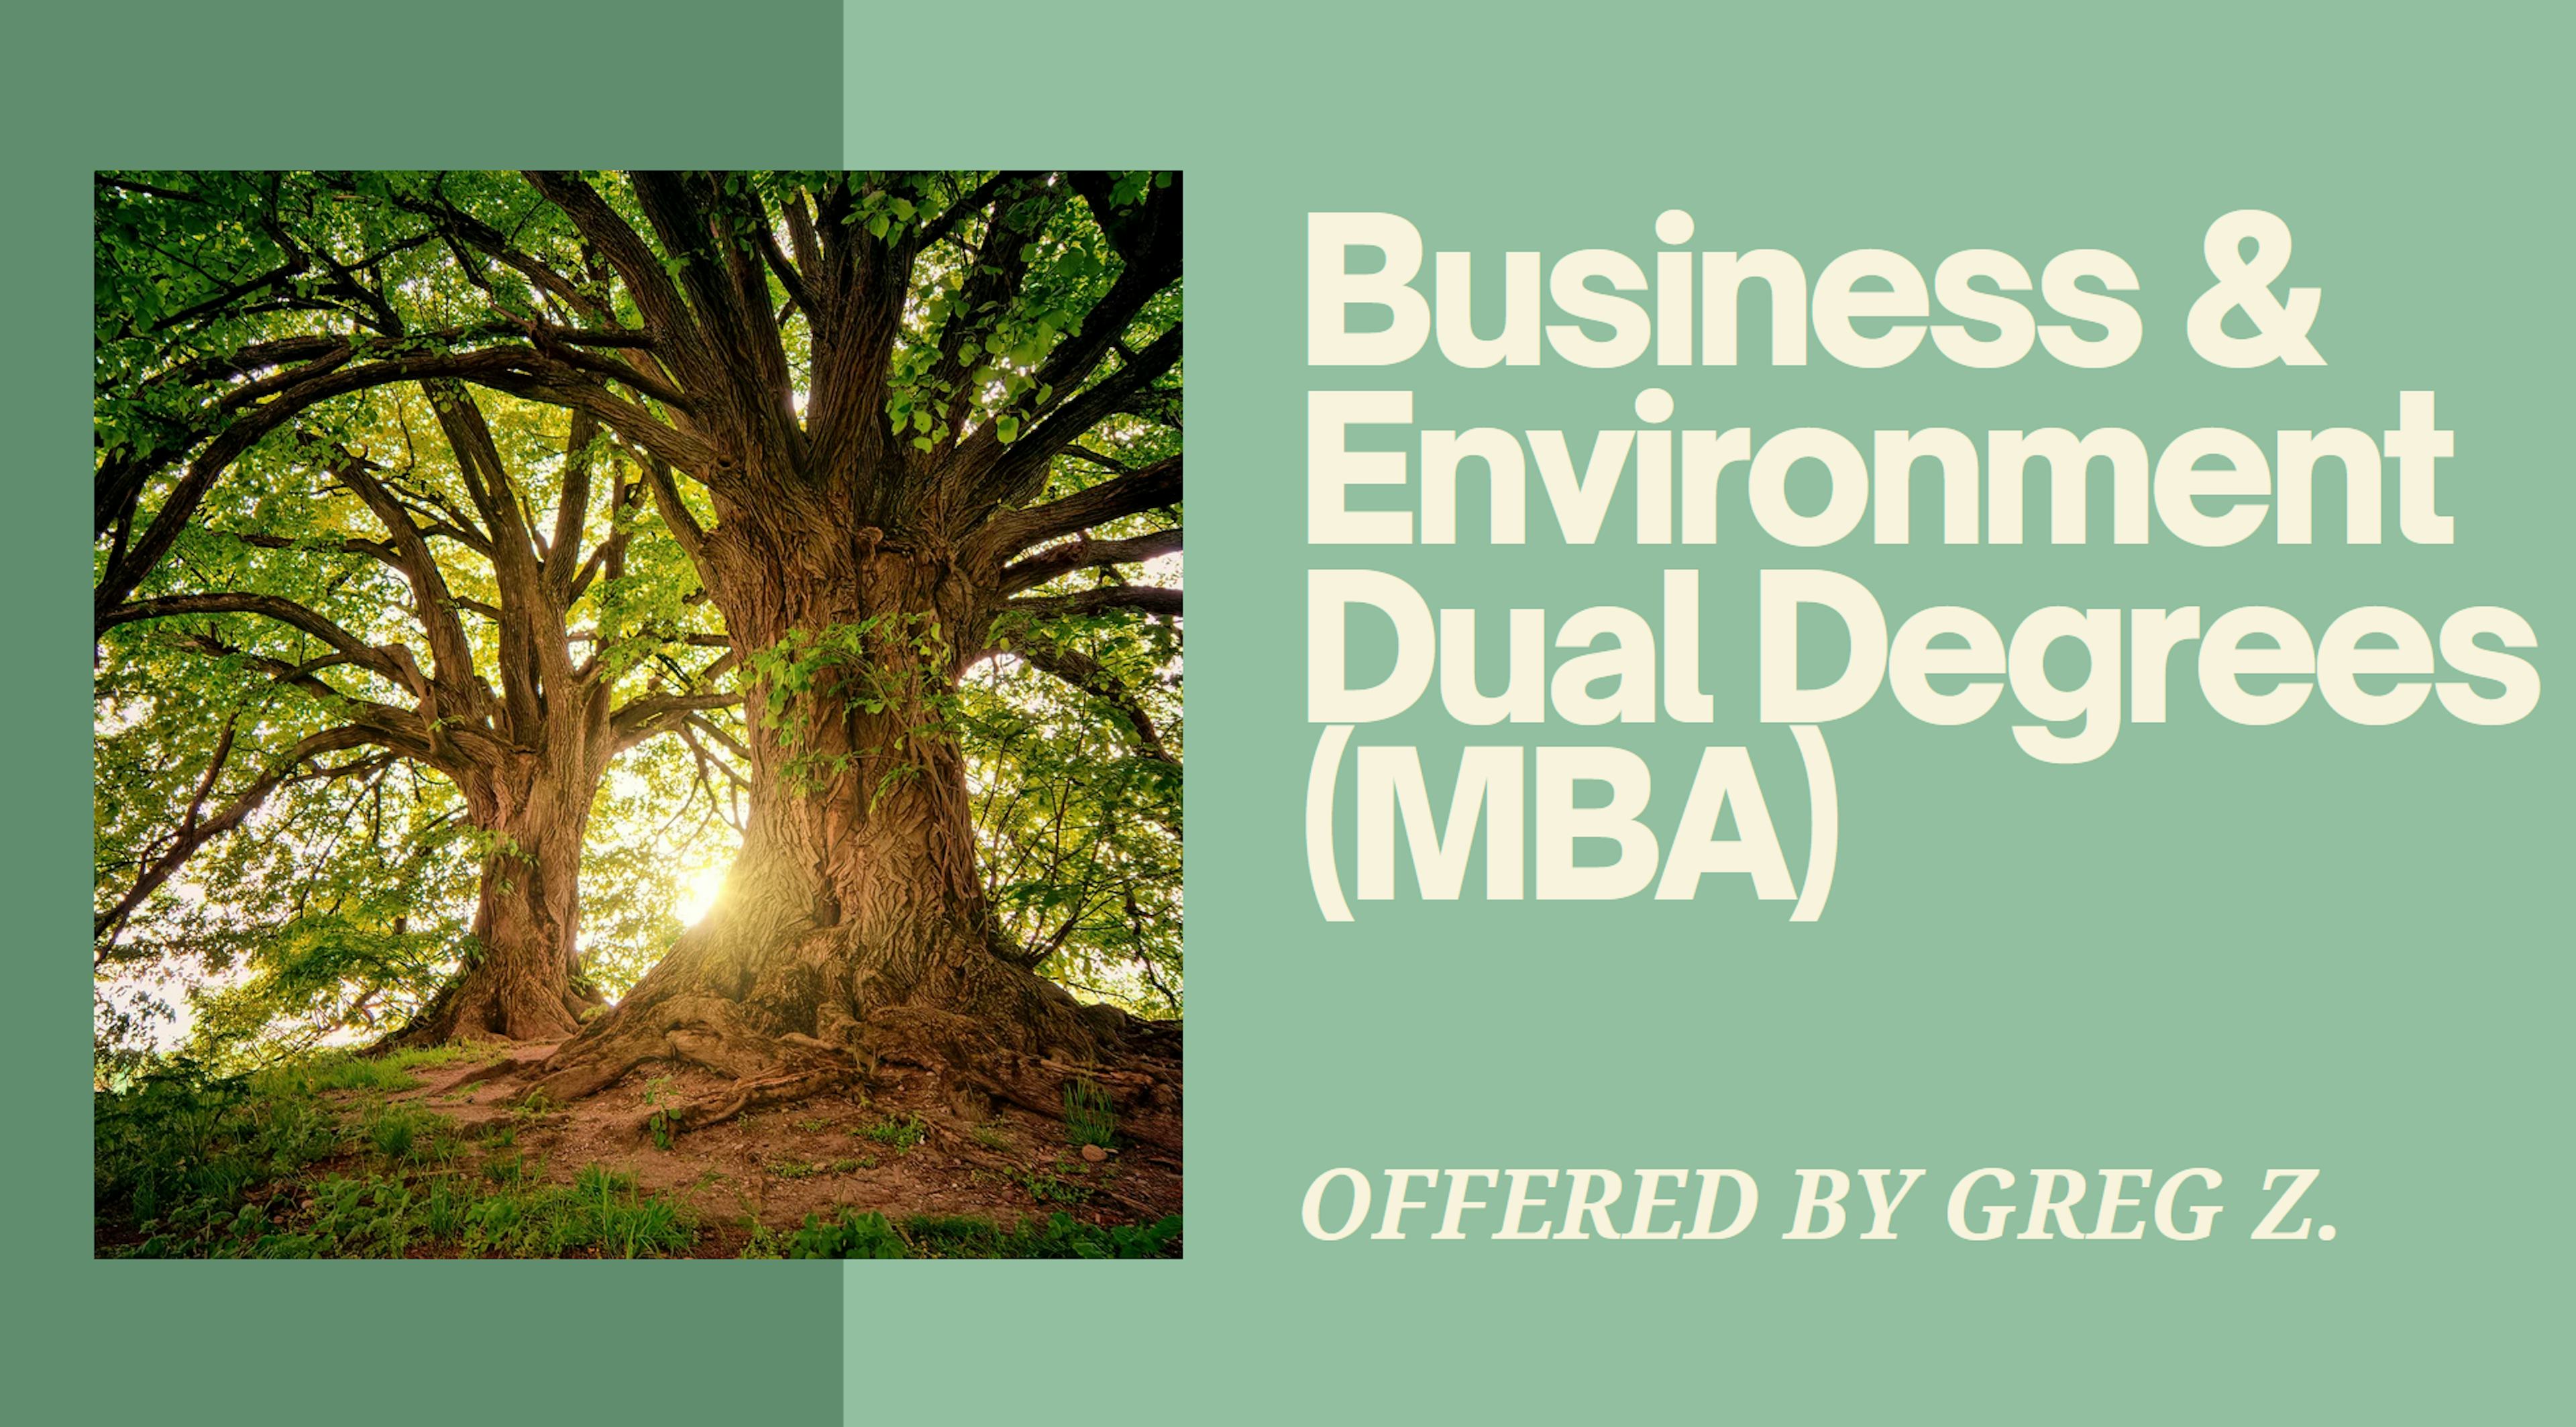 Business & Environment Dual Degrees (MBA)